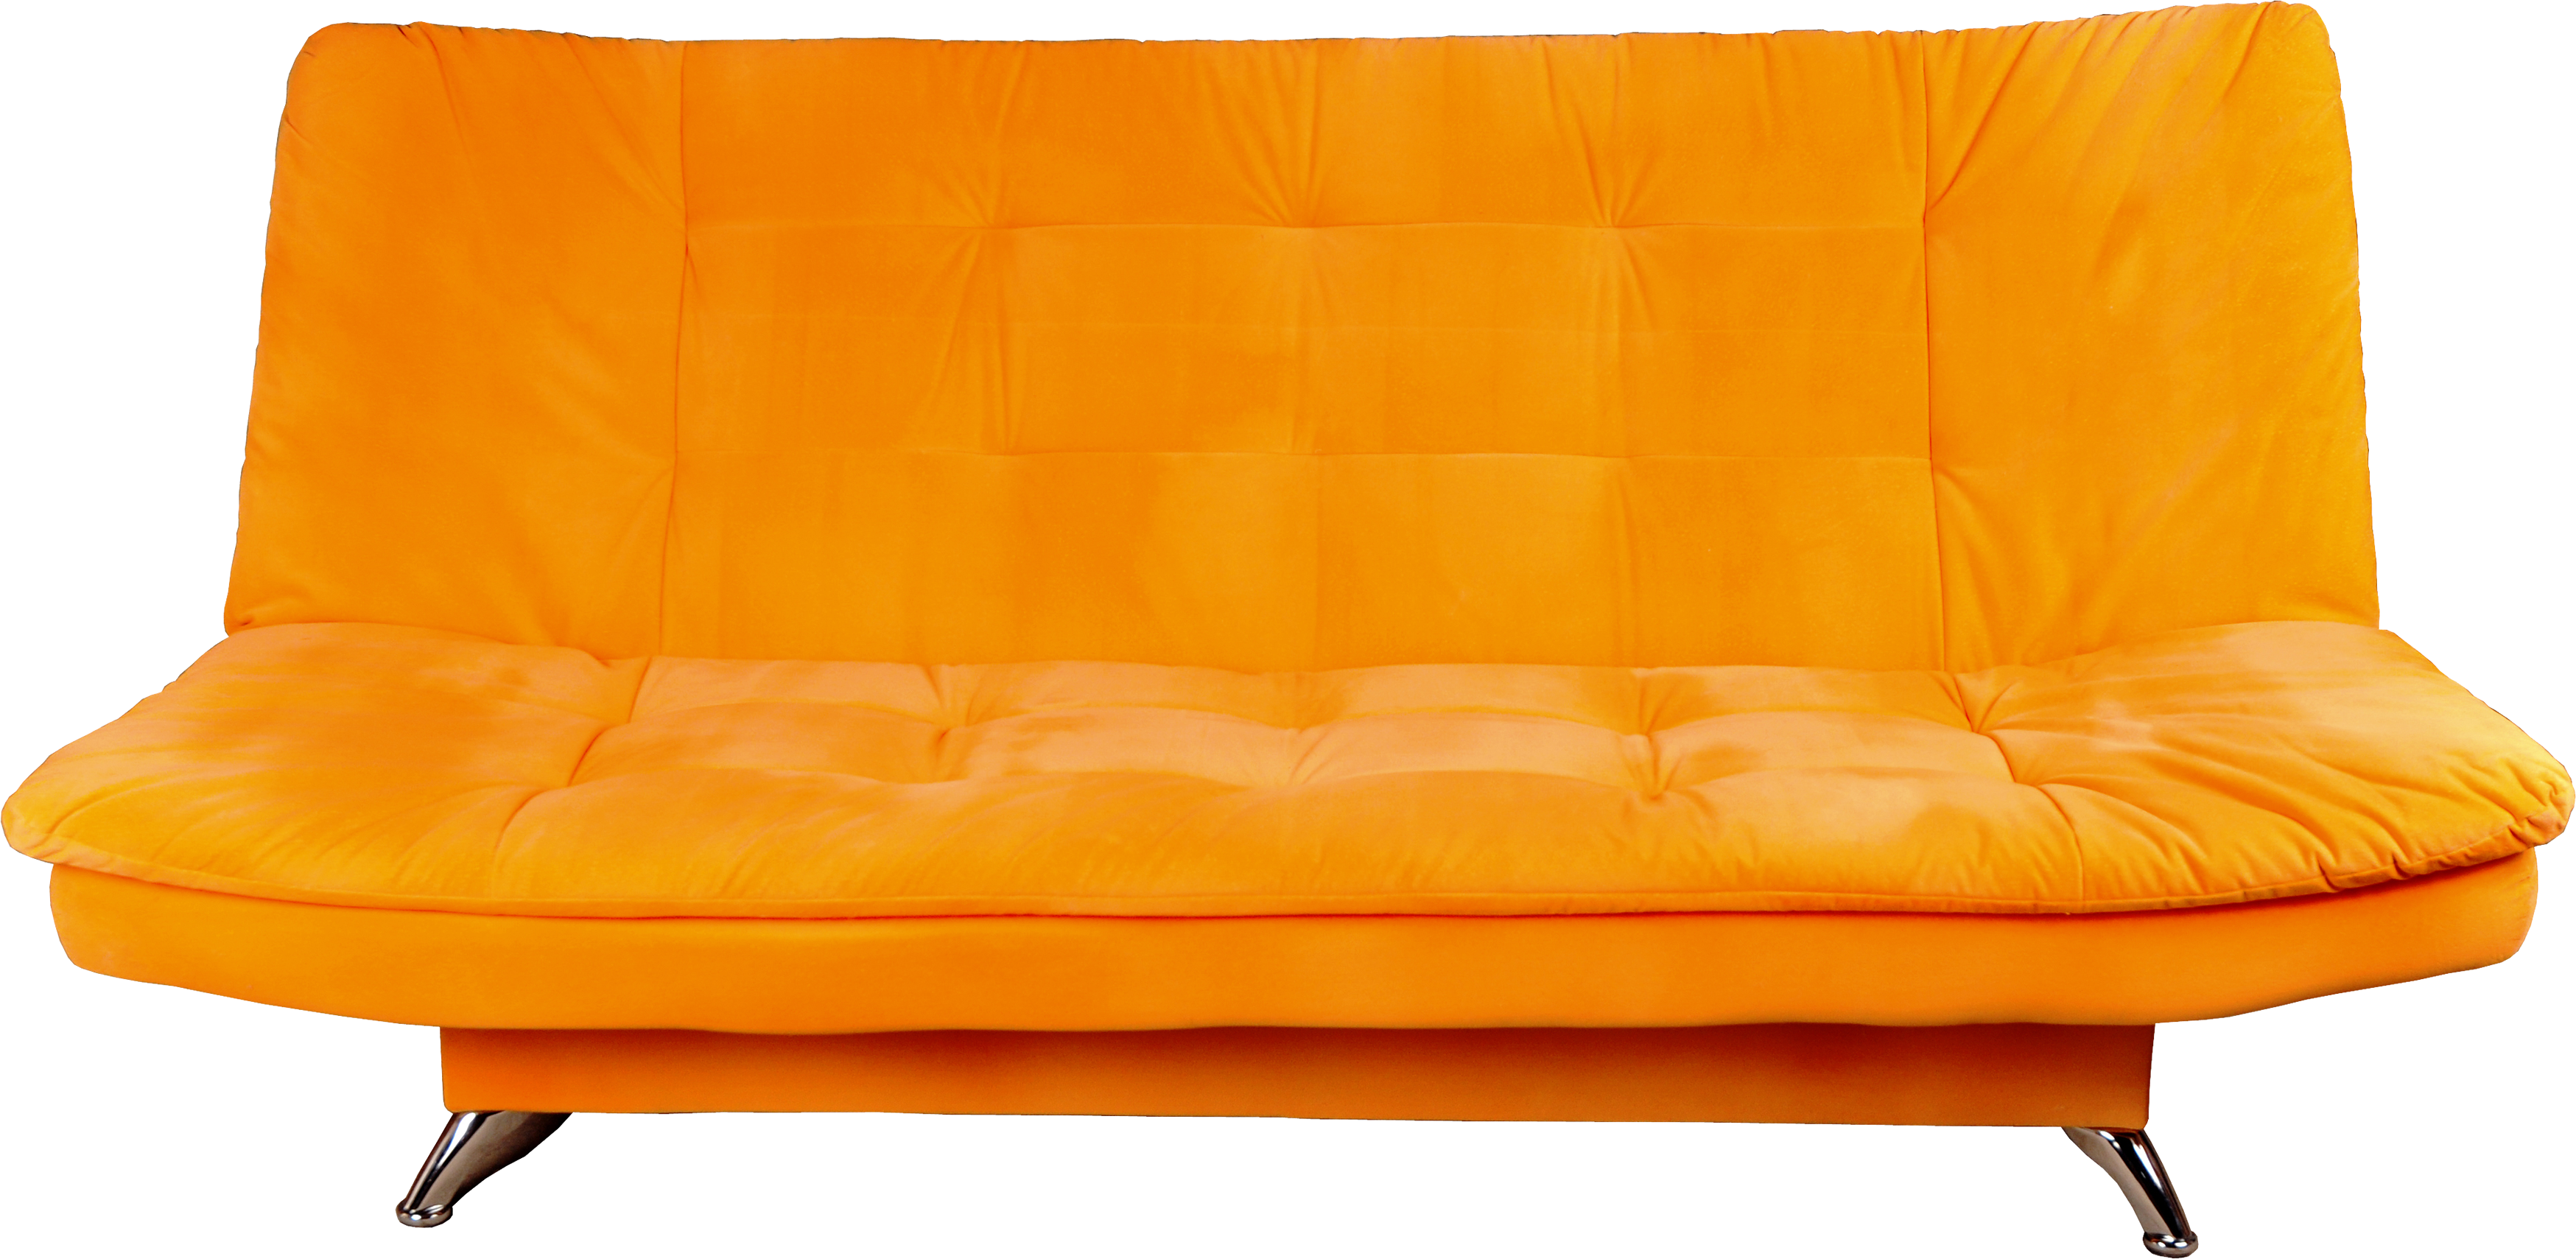 Luxury chaise longue Pic